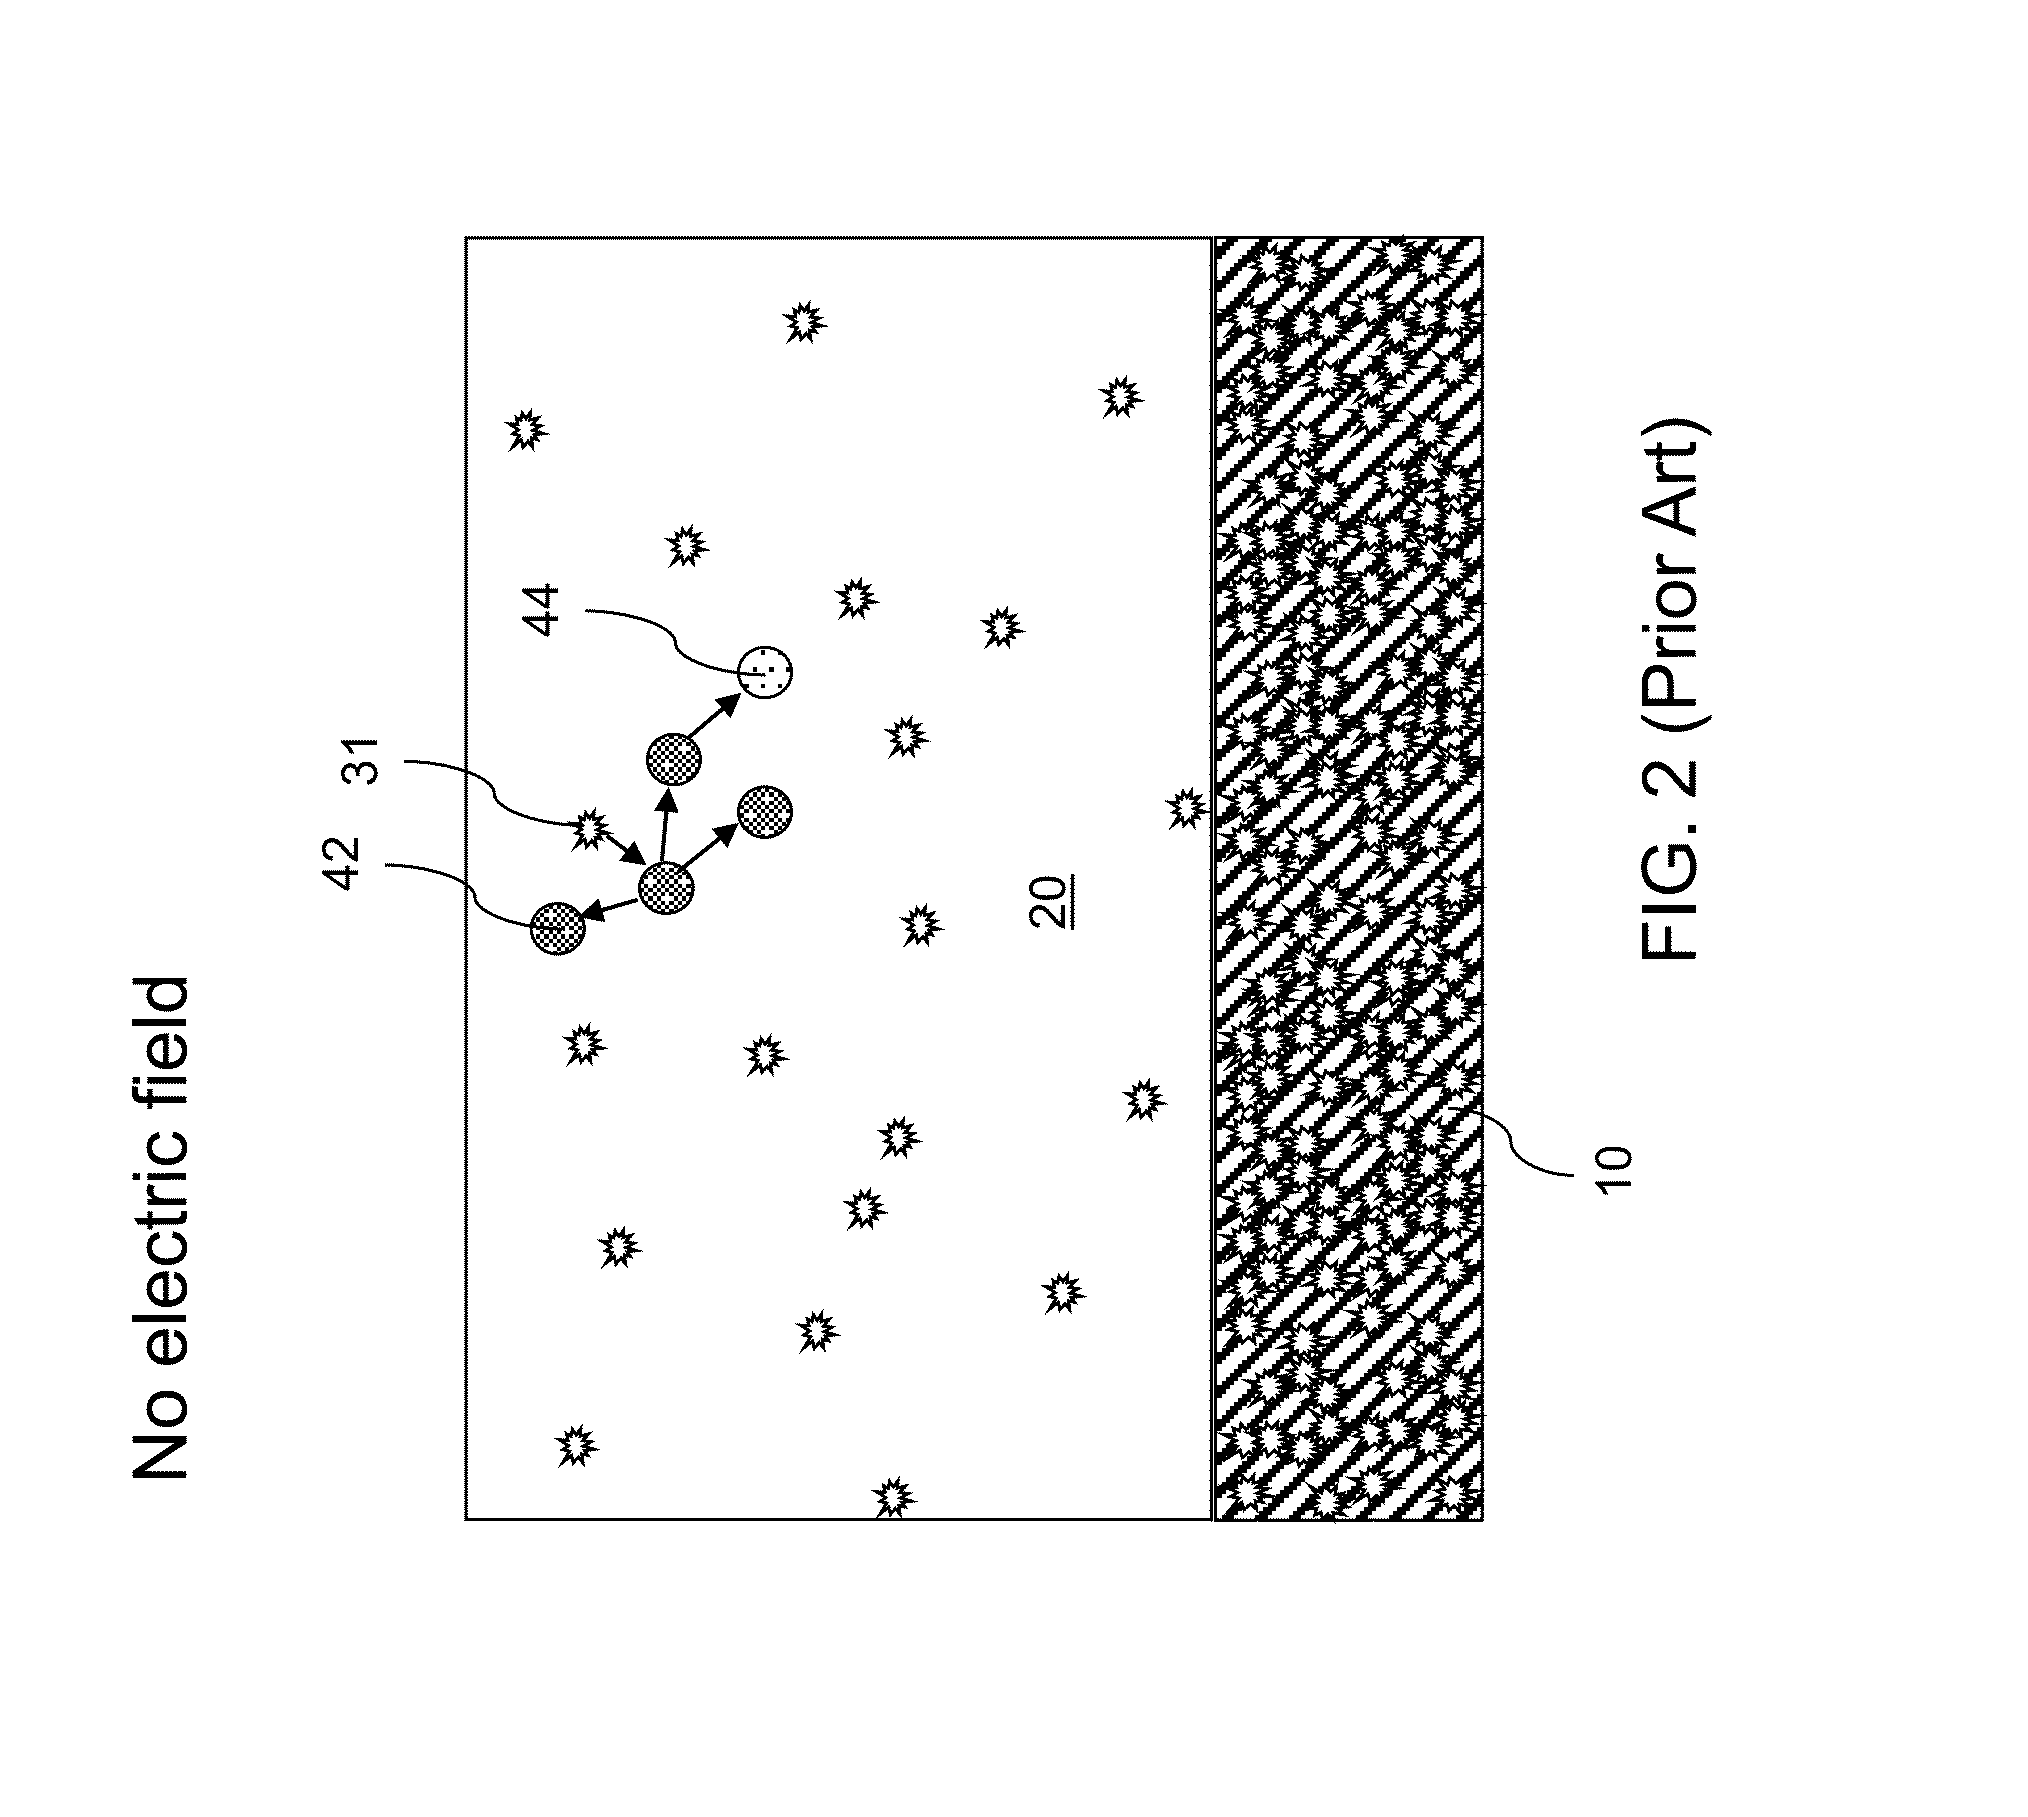 Amplification Method For Photoresist Exposure In Semiconductor Chip Manufacturing